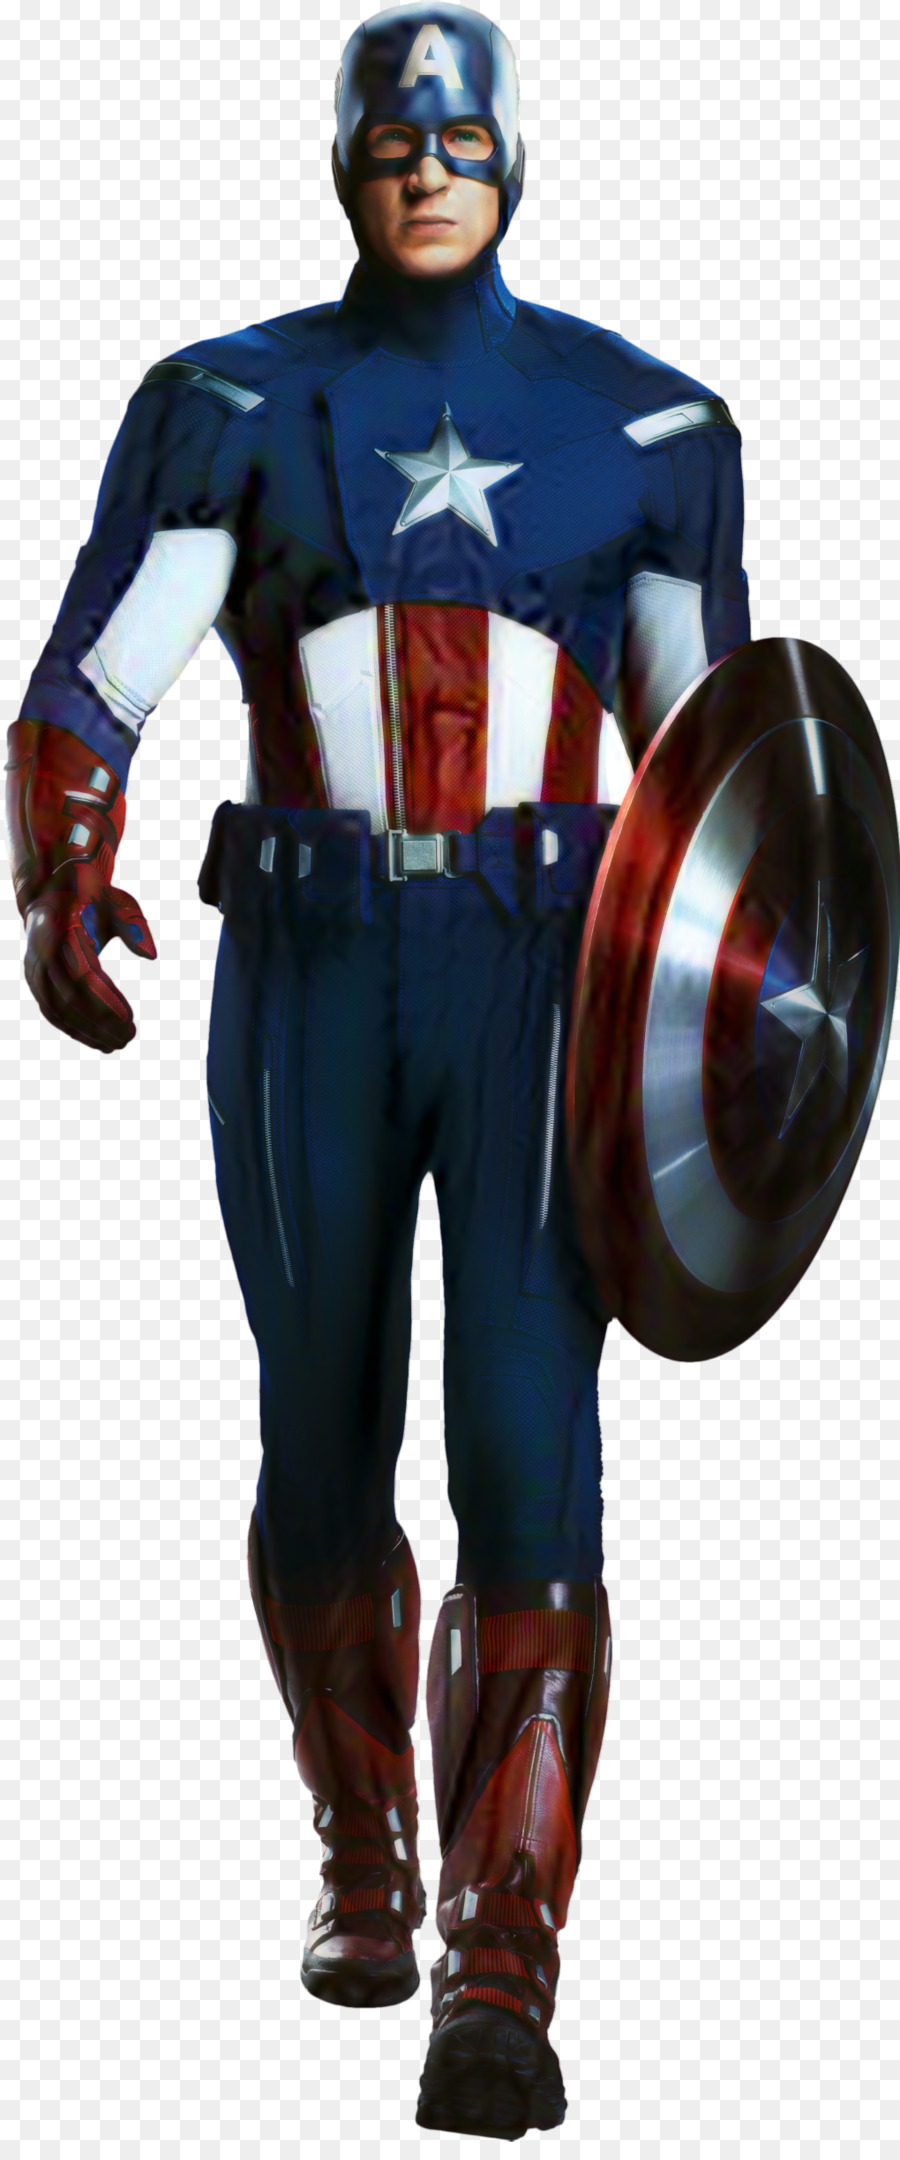 Captain America: The First Avenger Bucky Barnes Chris Evans The Avengers -  png download - 1020*2428 - Free Transparent Captain America png Download.